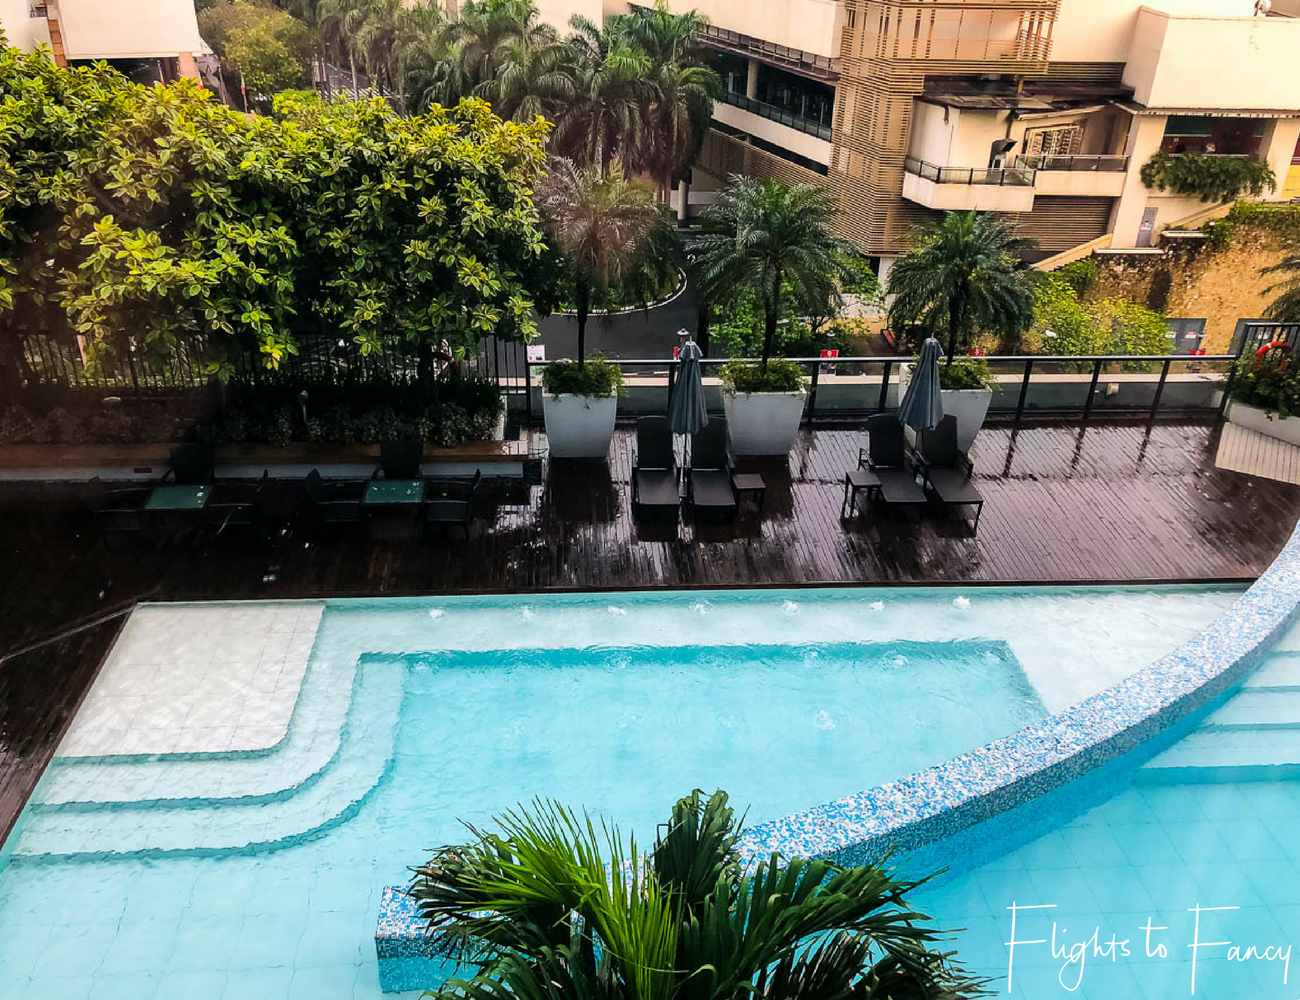 Flights to Fancy - View of the Fairmont Makati pool from room